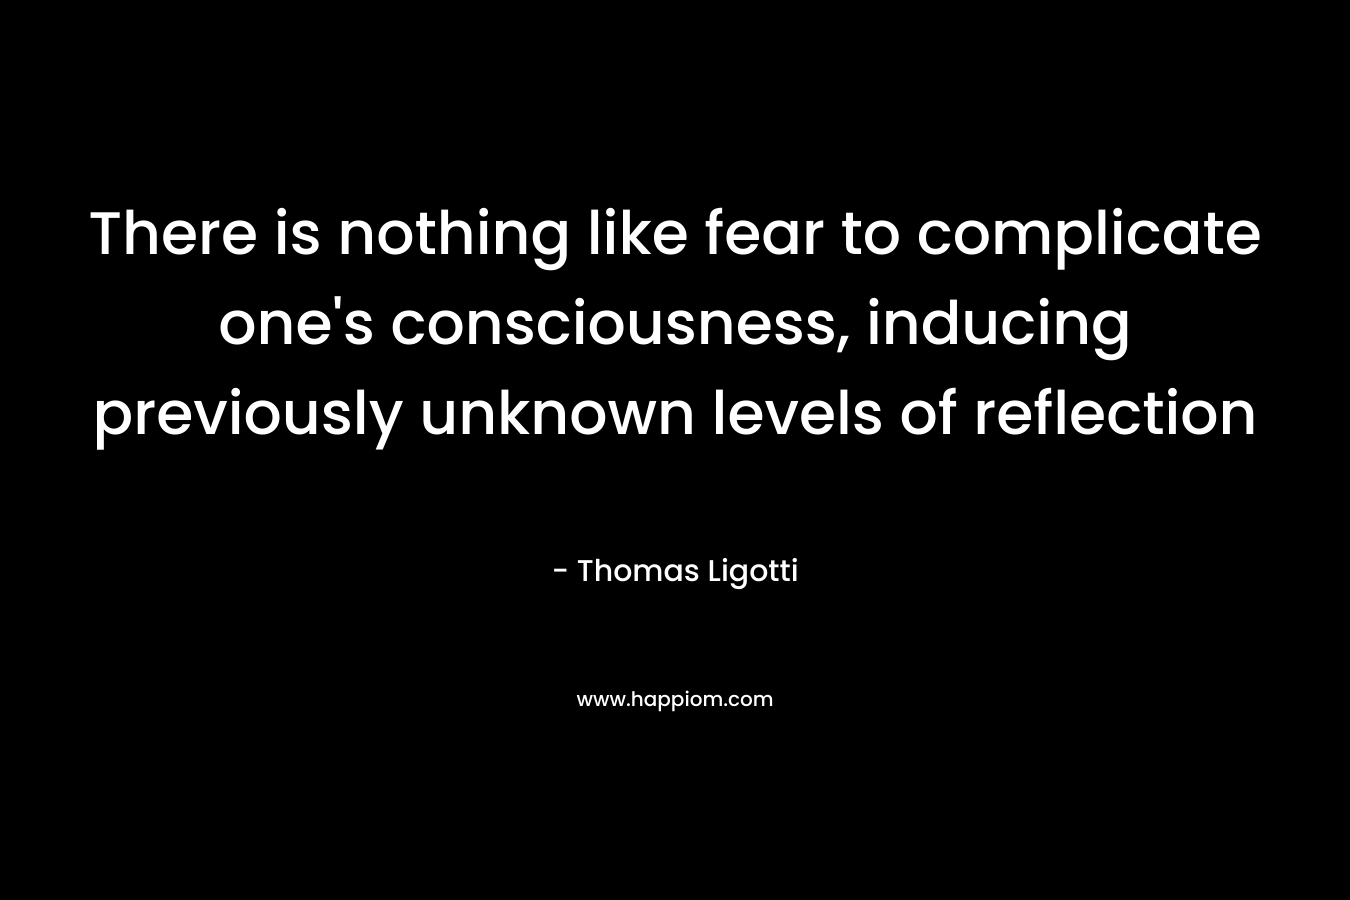 There is nothing like fear to complicate one’s consciousness, inducing previously unknown levels of reflection – Thomas Ligotti